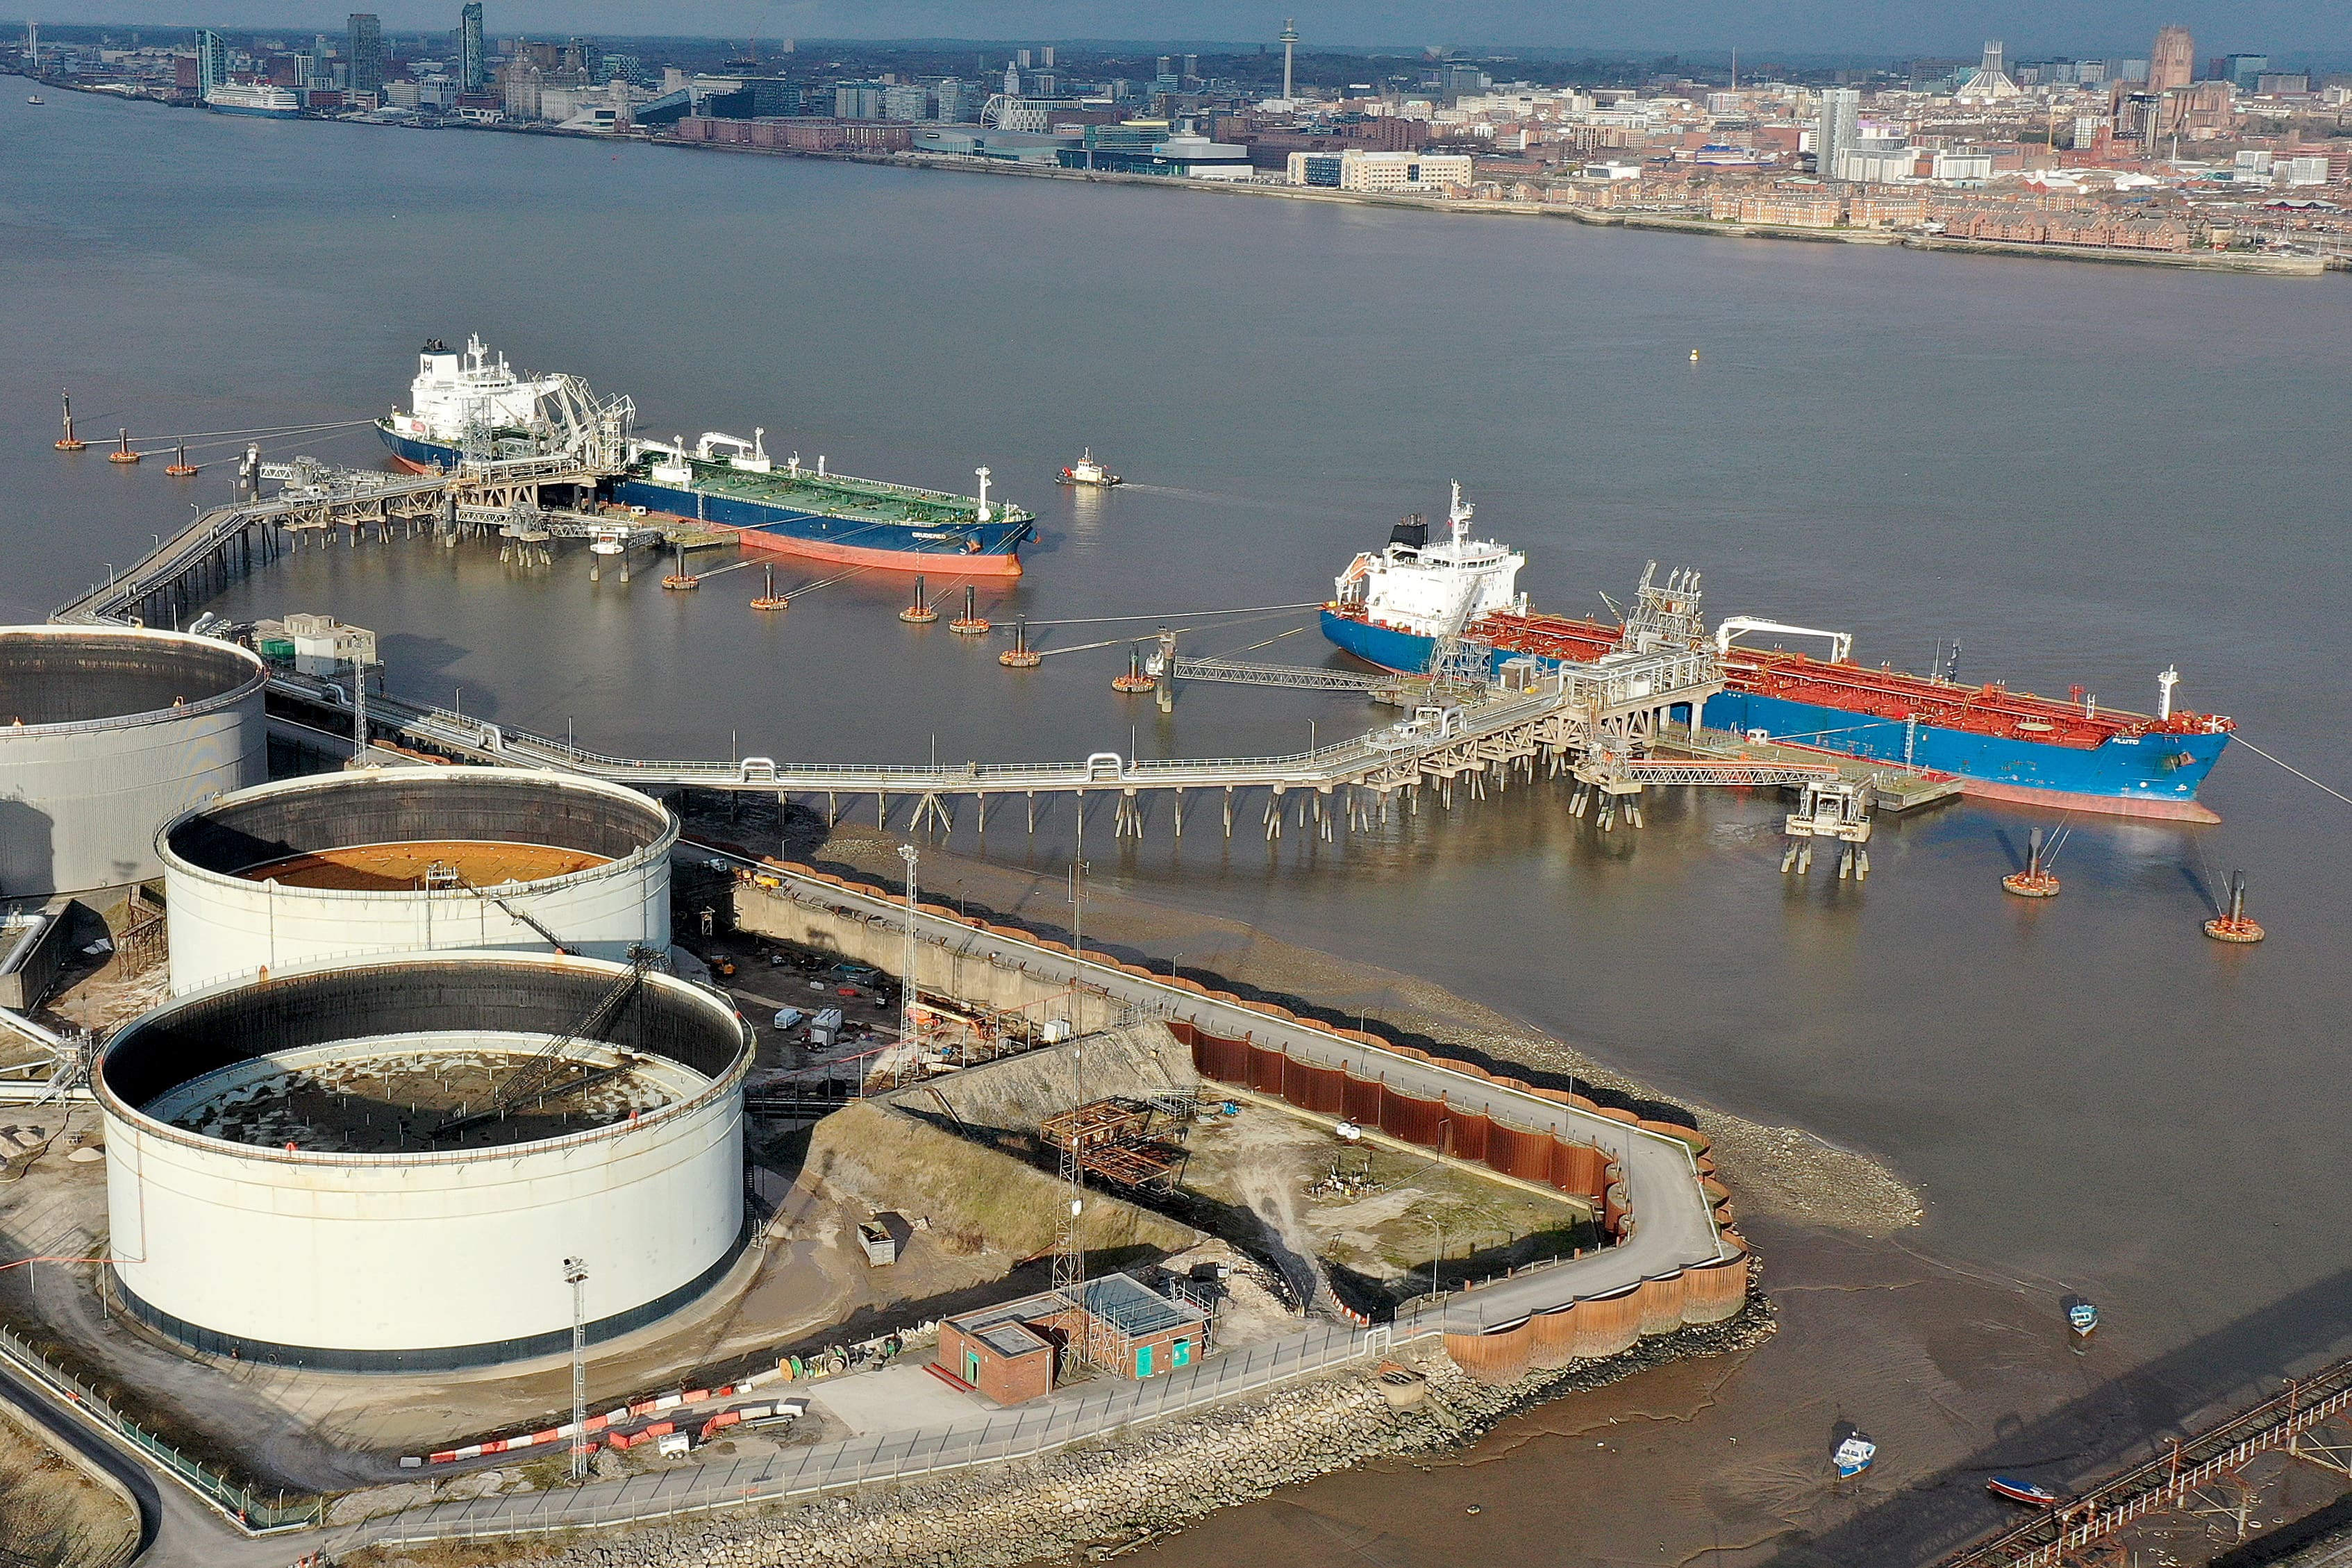 Angry dock workers in the UK are refusing to unload Russian oil due to Ukraine invasion